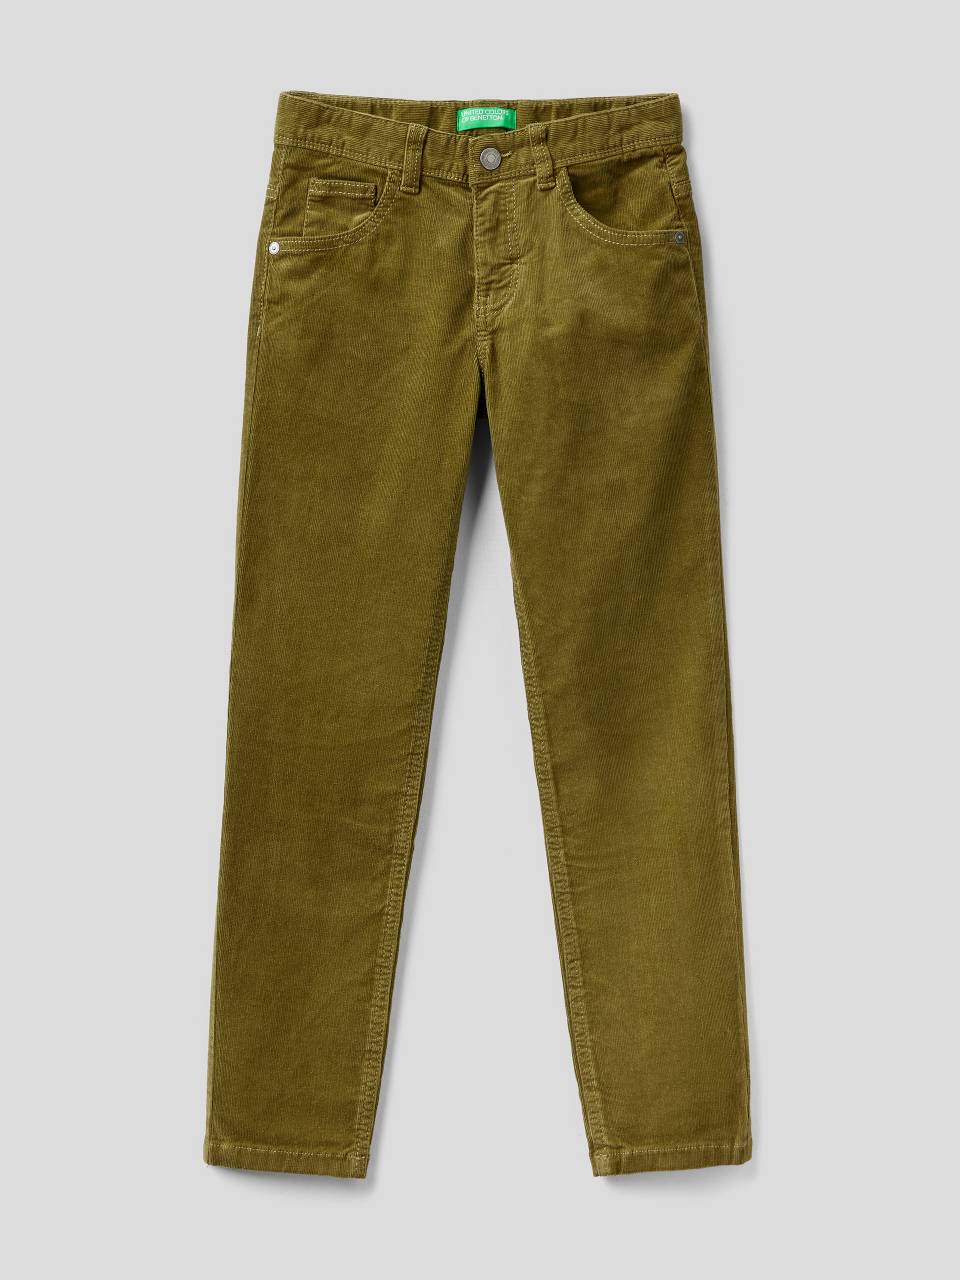 Buy United Colors of Benetton Solid Regular Fit Trousers online